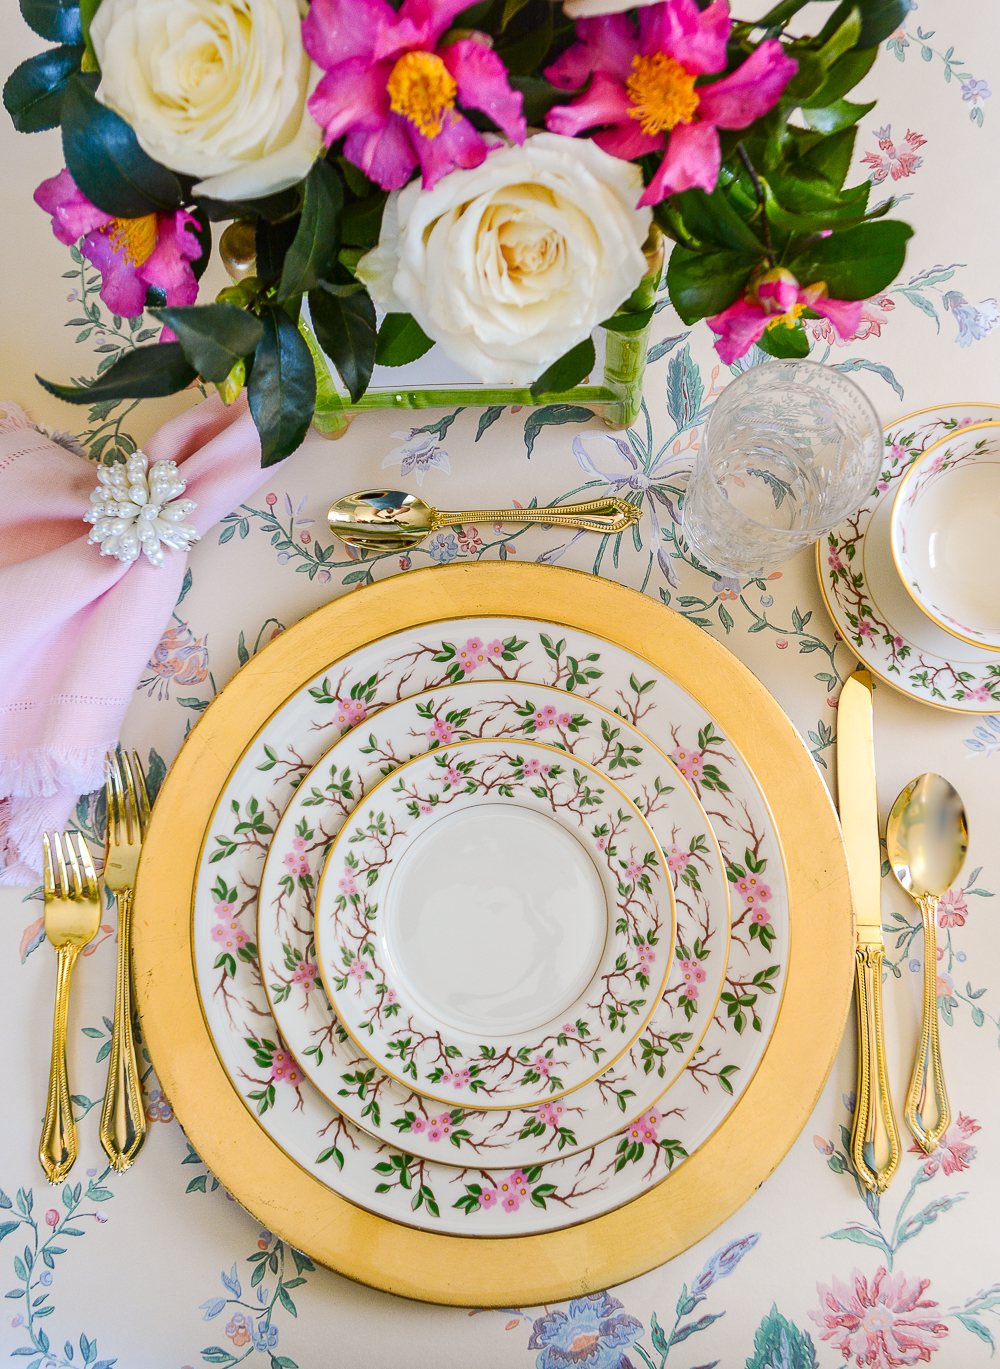 Franciscan Woodside Camellia tabletop collection